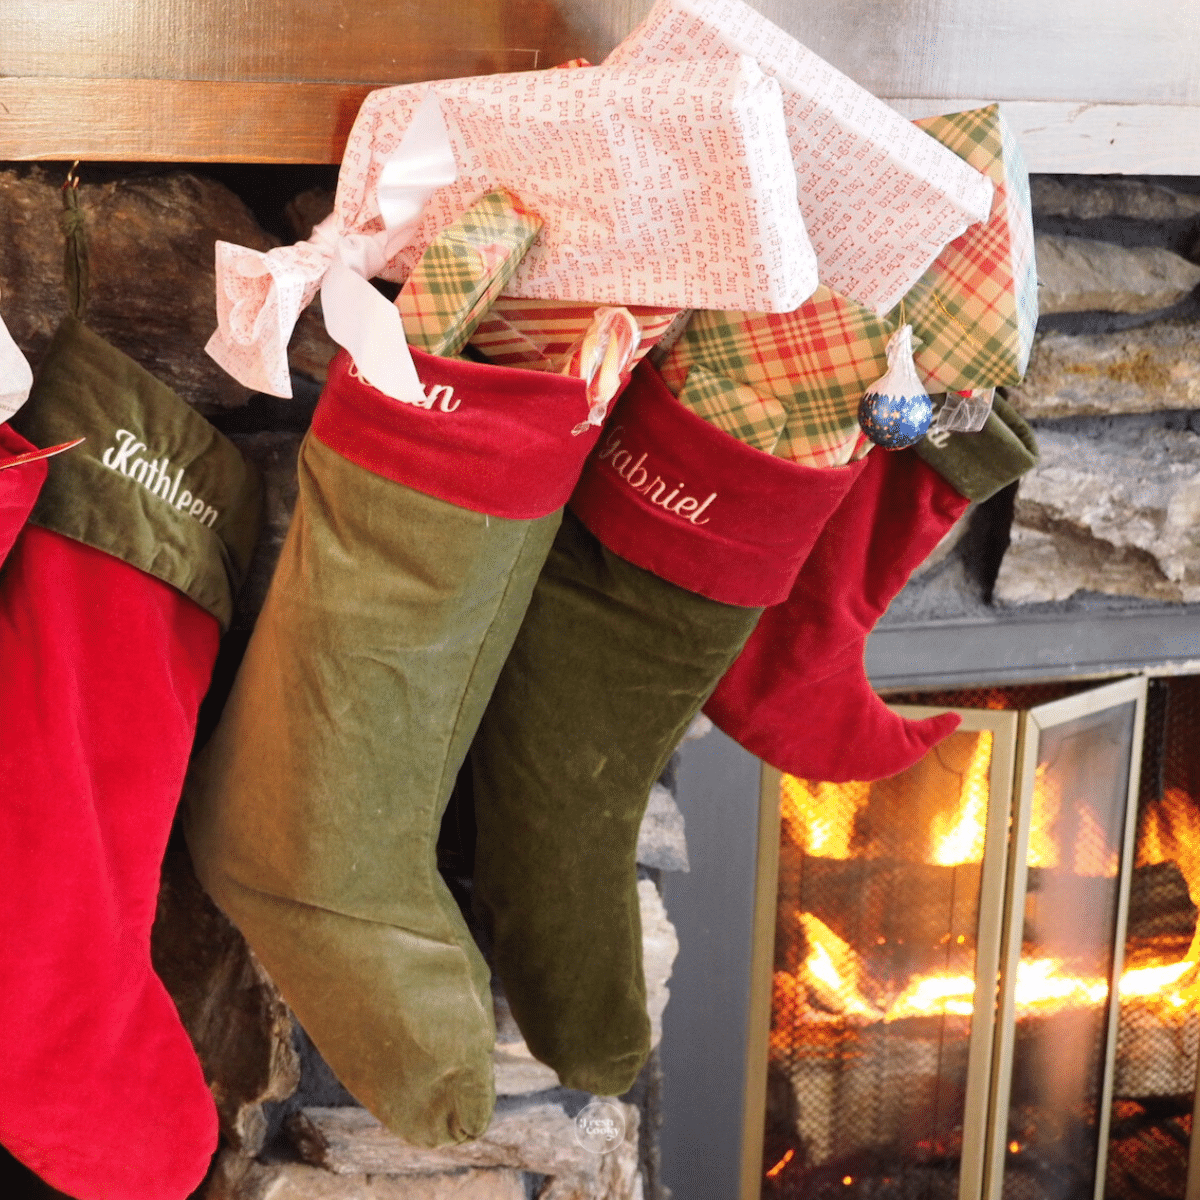 Stockings stuffed and hung on the mantel with a fire going.